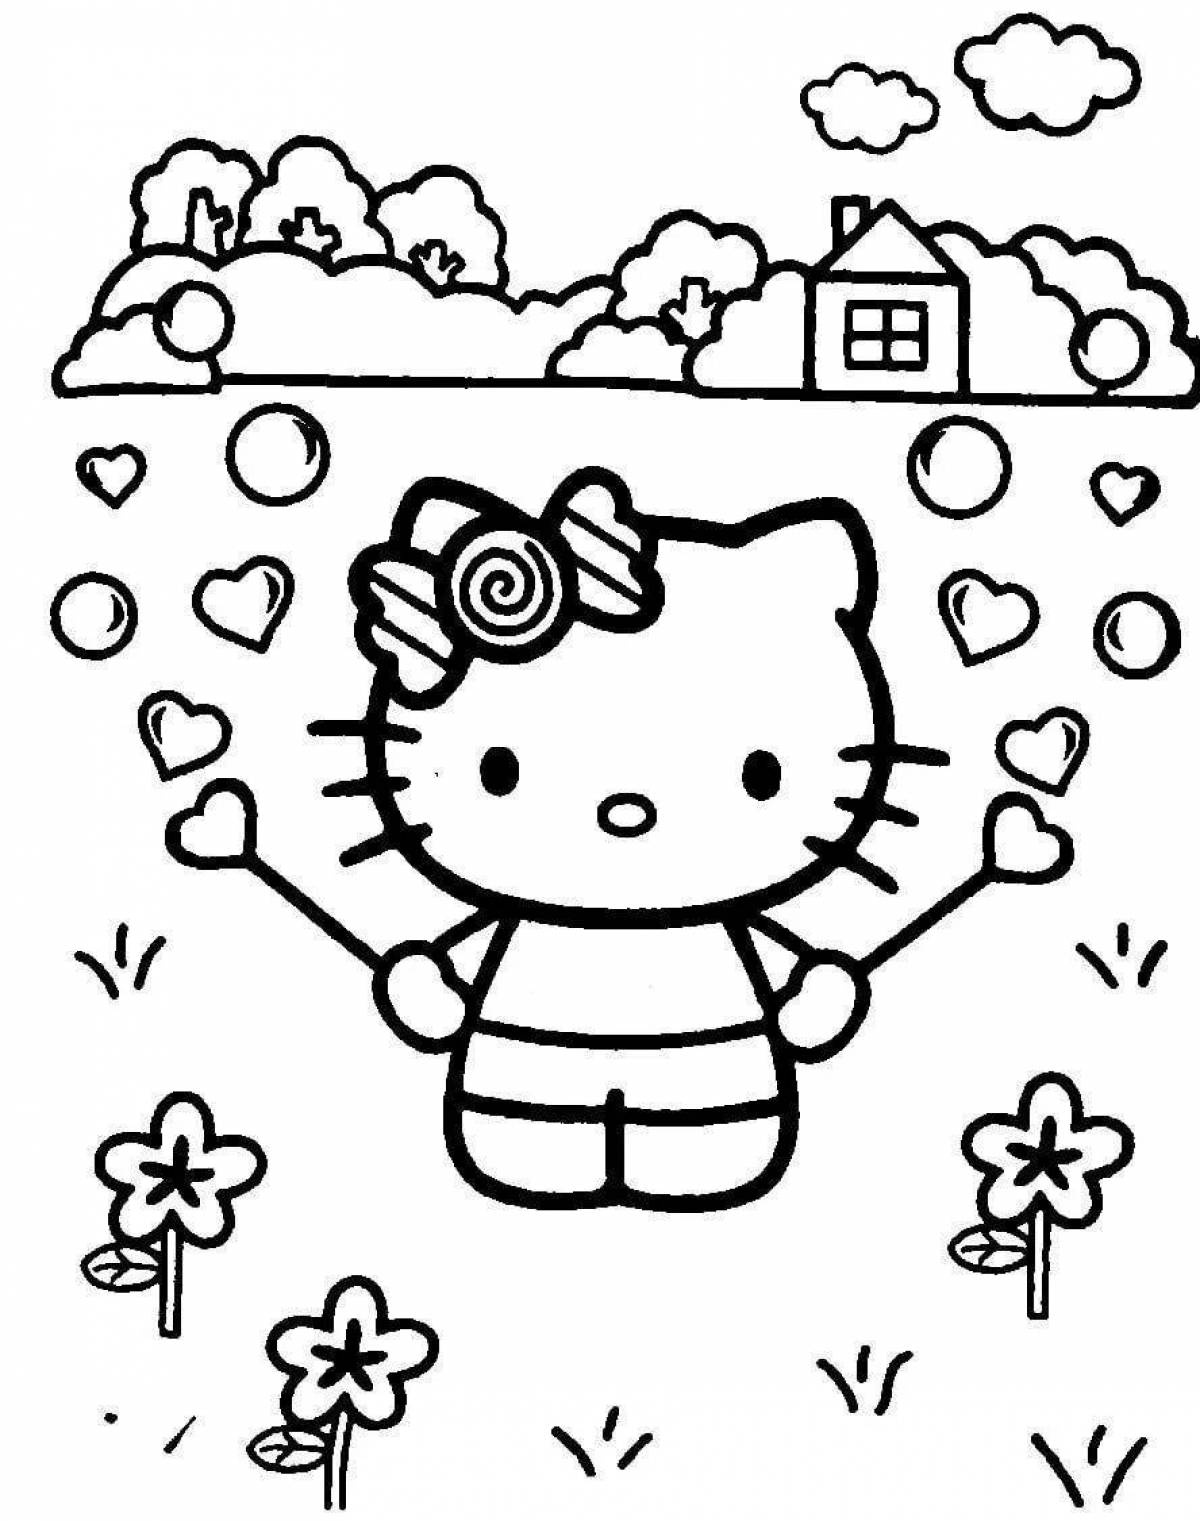 Witty astro kitty coloring book